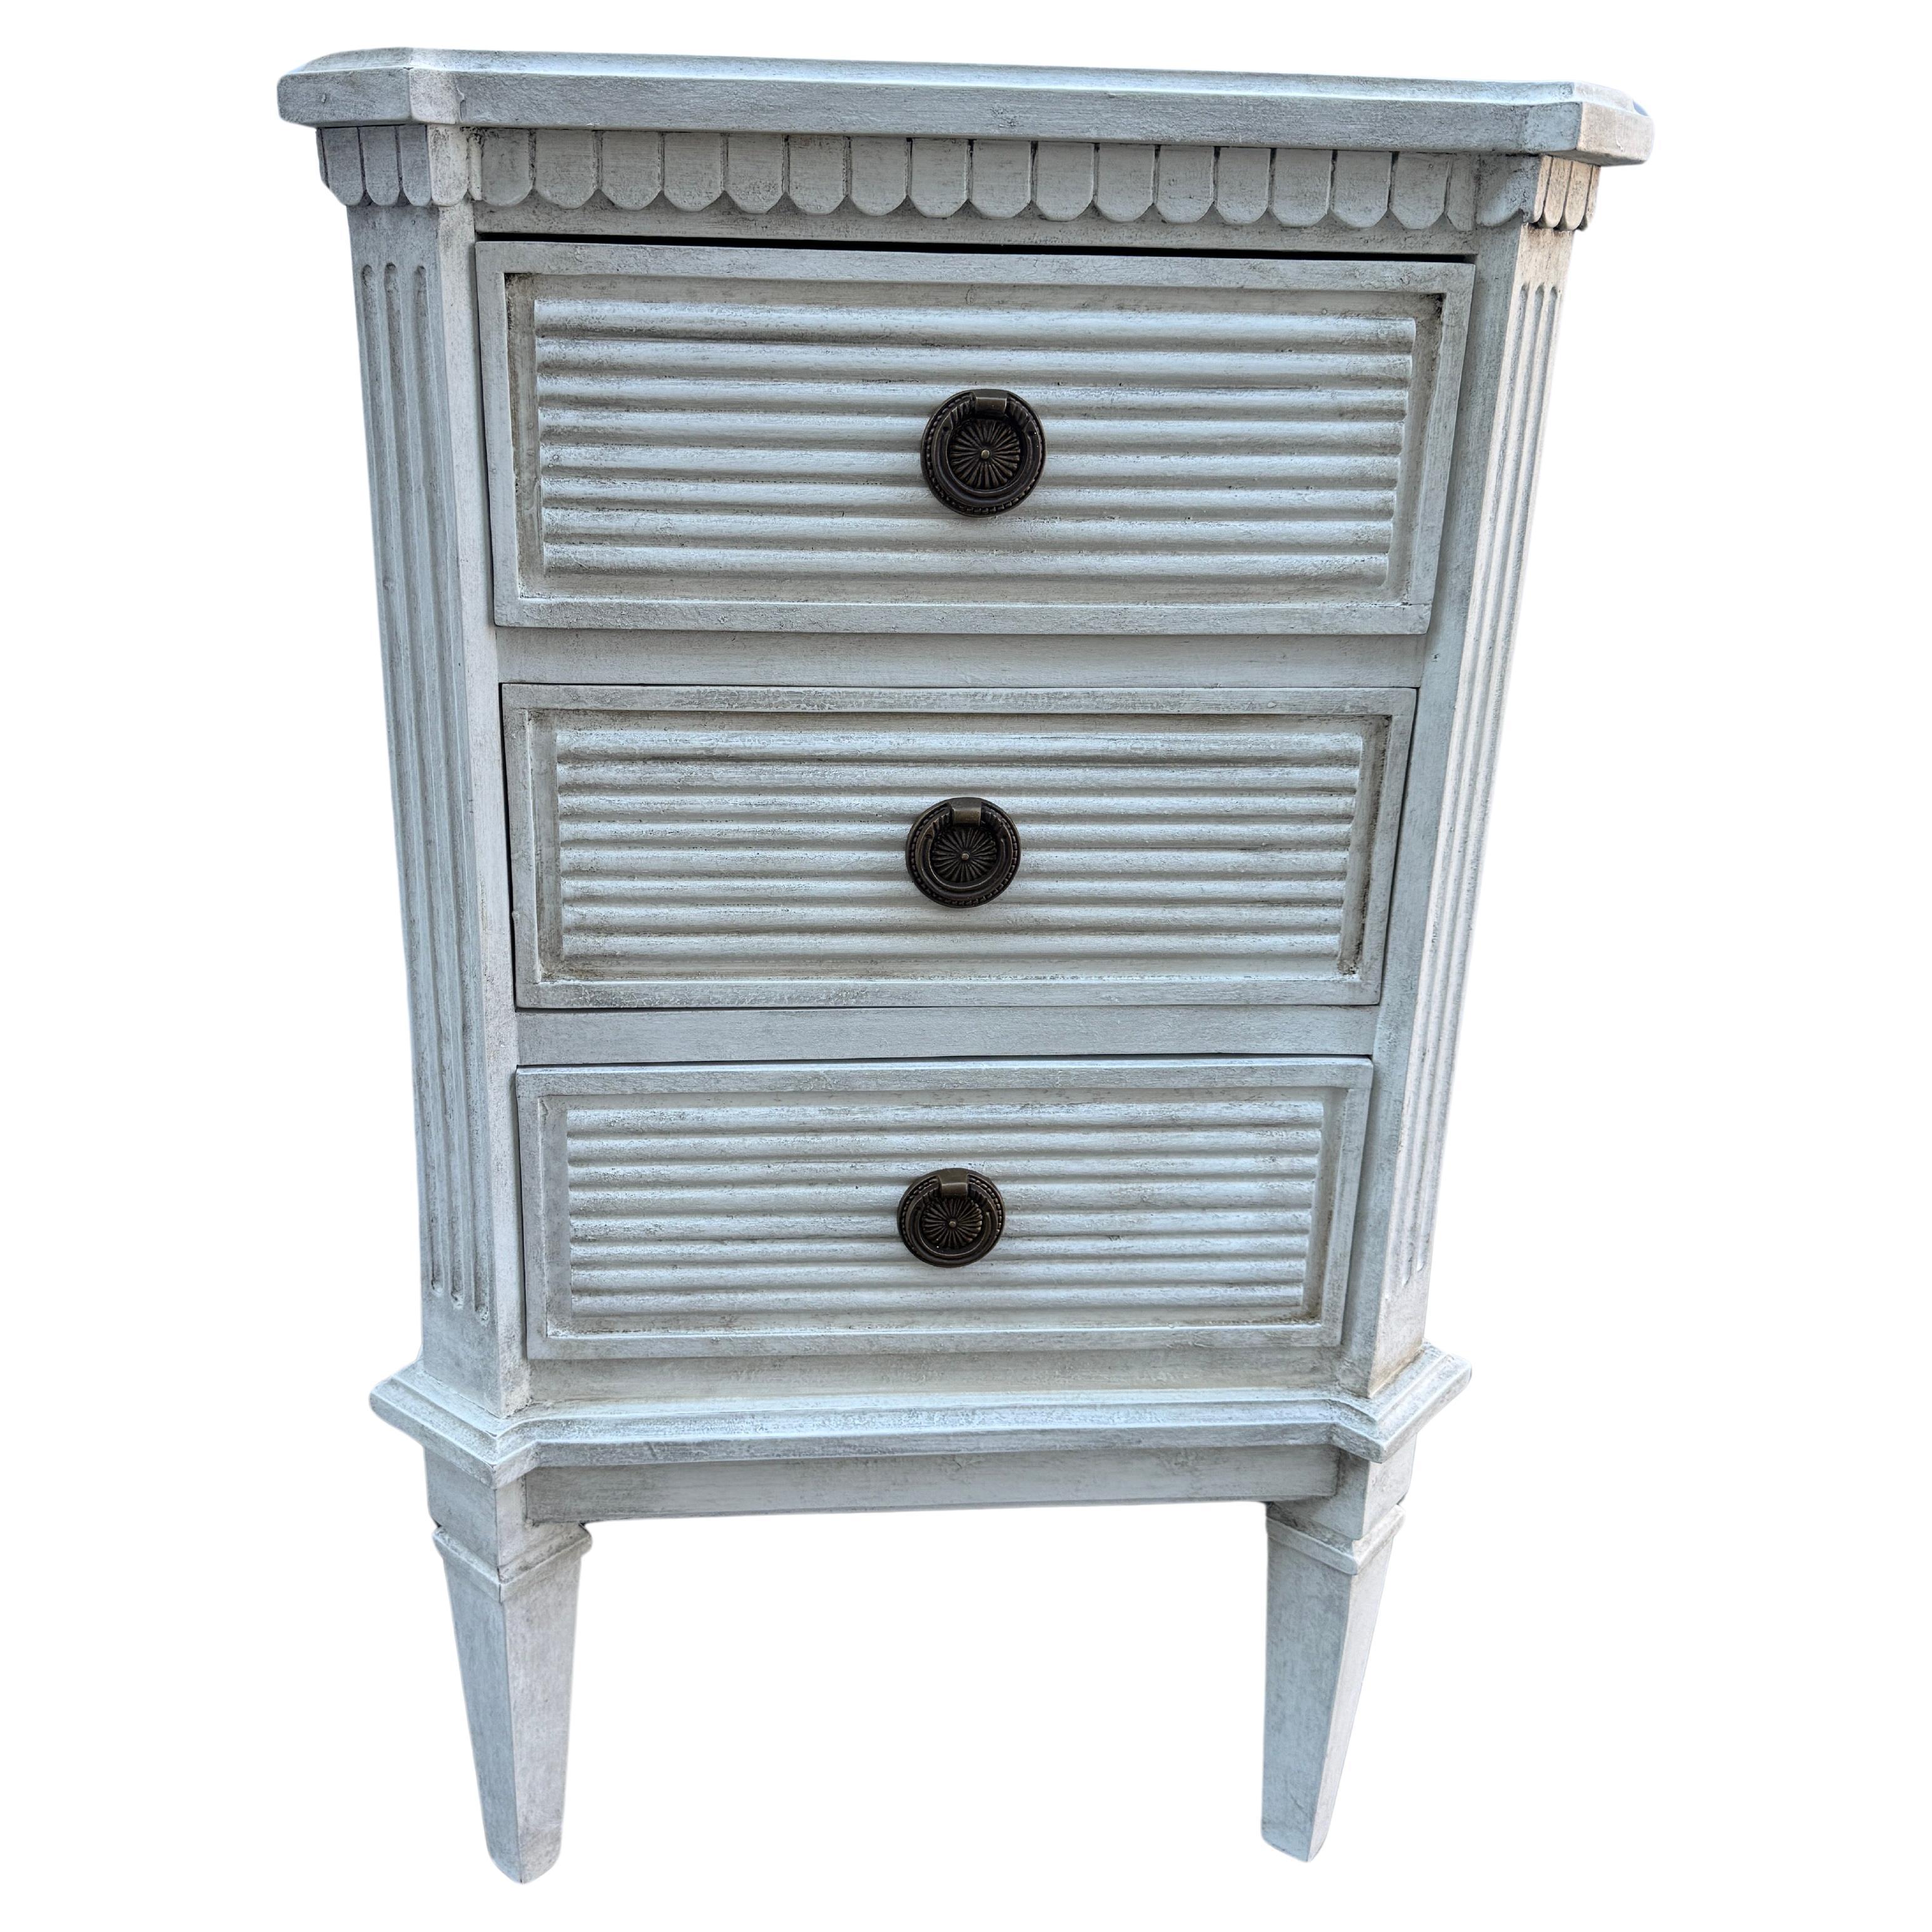 White Painted Gustavian Style Chest of Drawers

Hand painted Gustavian style chest with three drawers constructed from solid wood with a hand-applied distressed finish with brass ring hardware.  This classic Swedish style chest of drawers, small